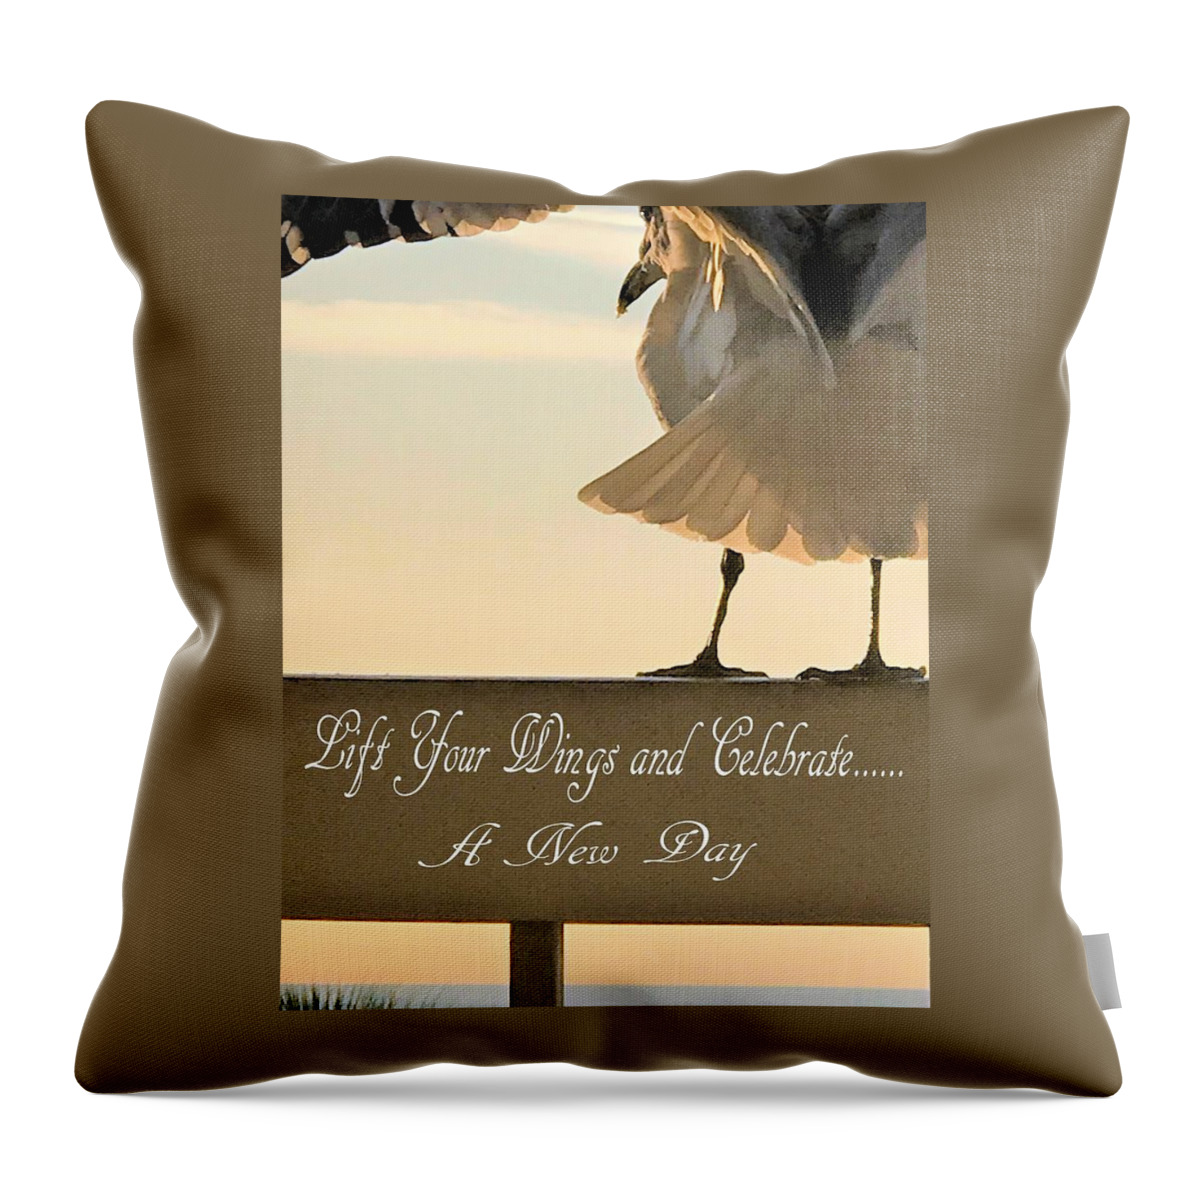 Sea Throw Pillow featuring the photograph Seaside by Jan Gelders